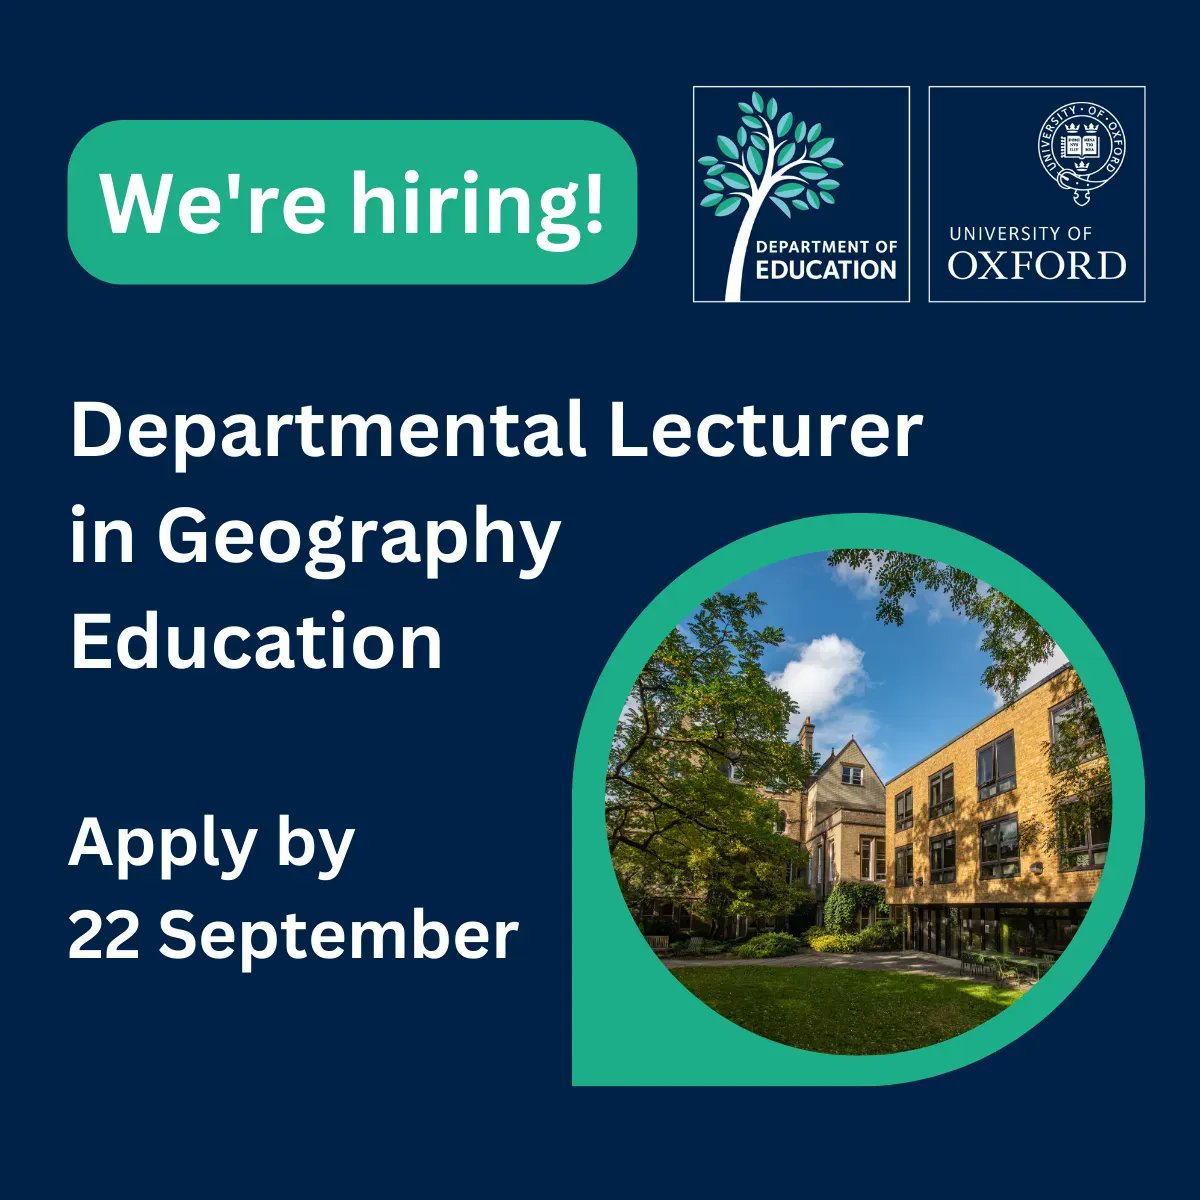 New vacancy! We are recruiting a Departmental Lecturer in Geography Education to join our academic team. Find out more and apply ➡ buff.ly/3EuRgvn #edutwitter #hiring @UniofOxford